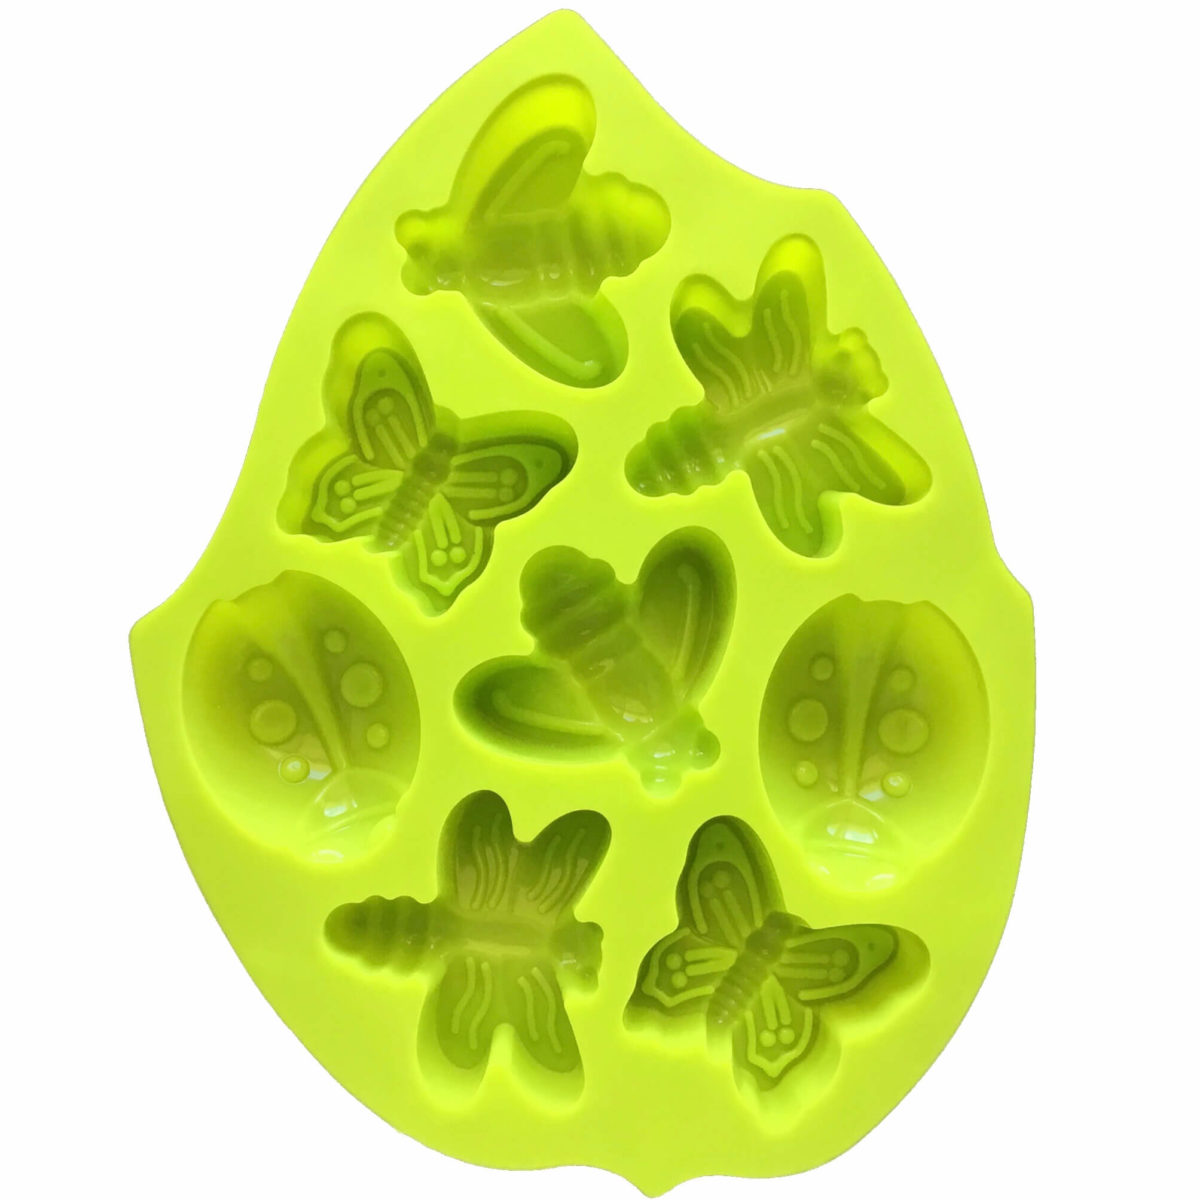 Green leaf-shaped silicone mould with eight cavities - two each of butterfly, bee, ladybug and dragonfly showing mould cavity details